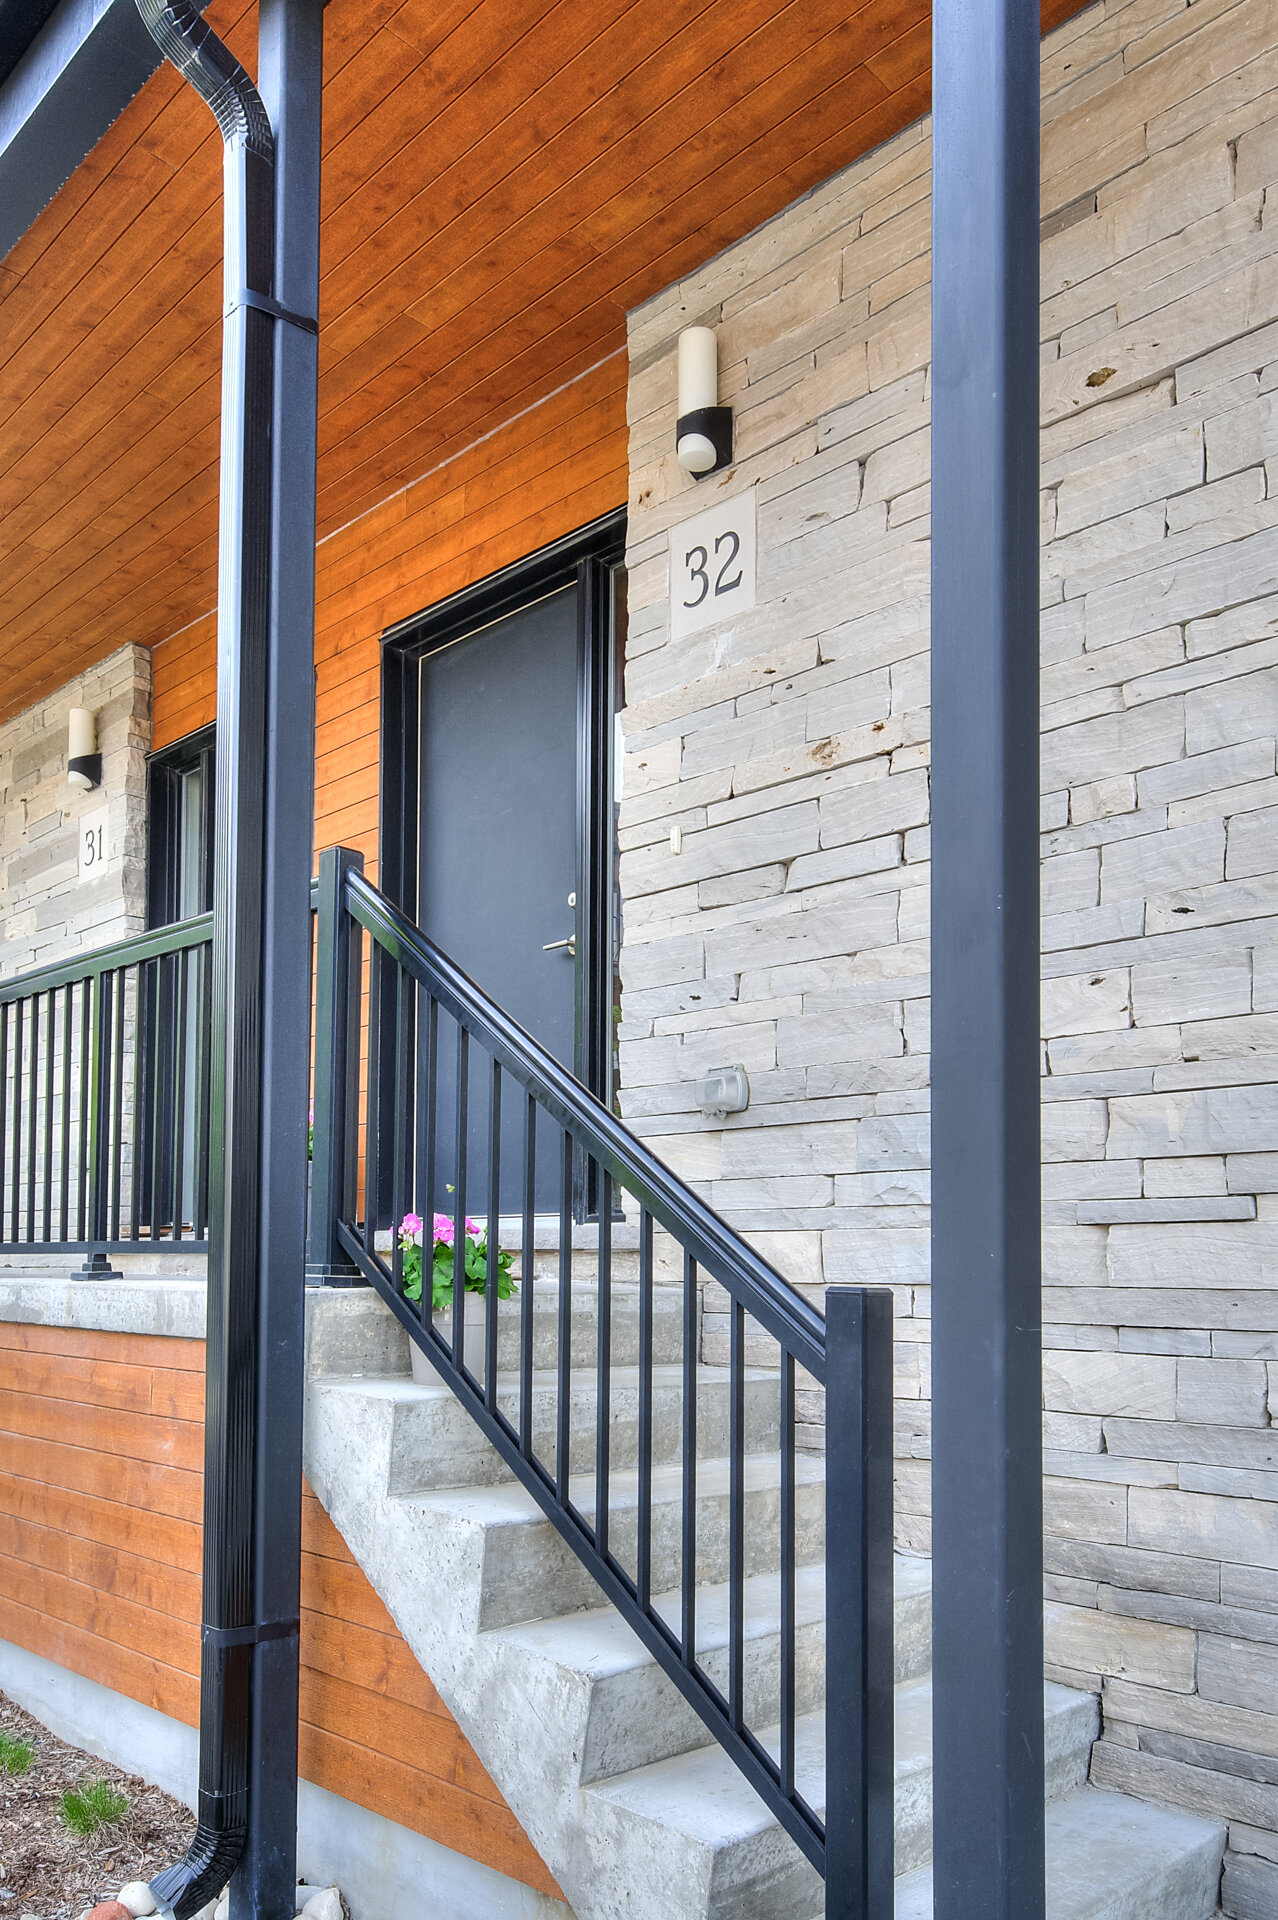 Arkell Lofts Condo for Sale - 32-32 Arkell Road - Guelph Real Estate Agent Listings - Adam Stewart Realtor - Chestnut Park Real Estate Guelph 12.jpg